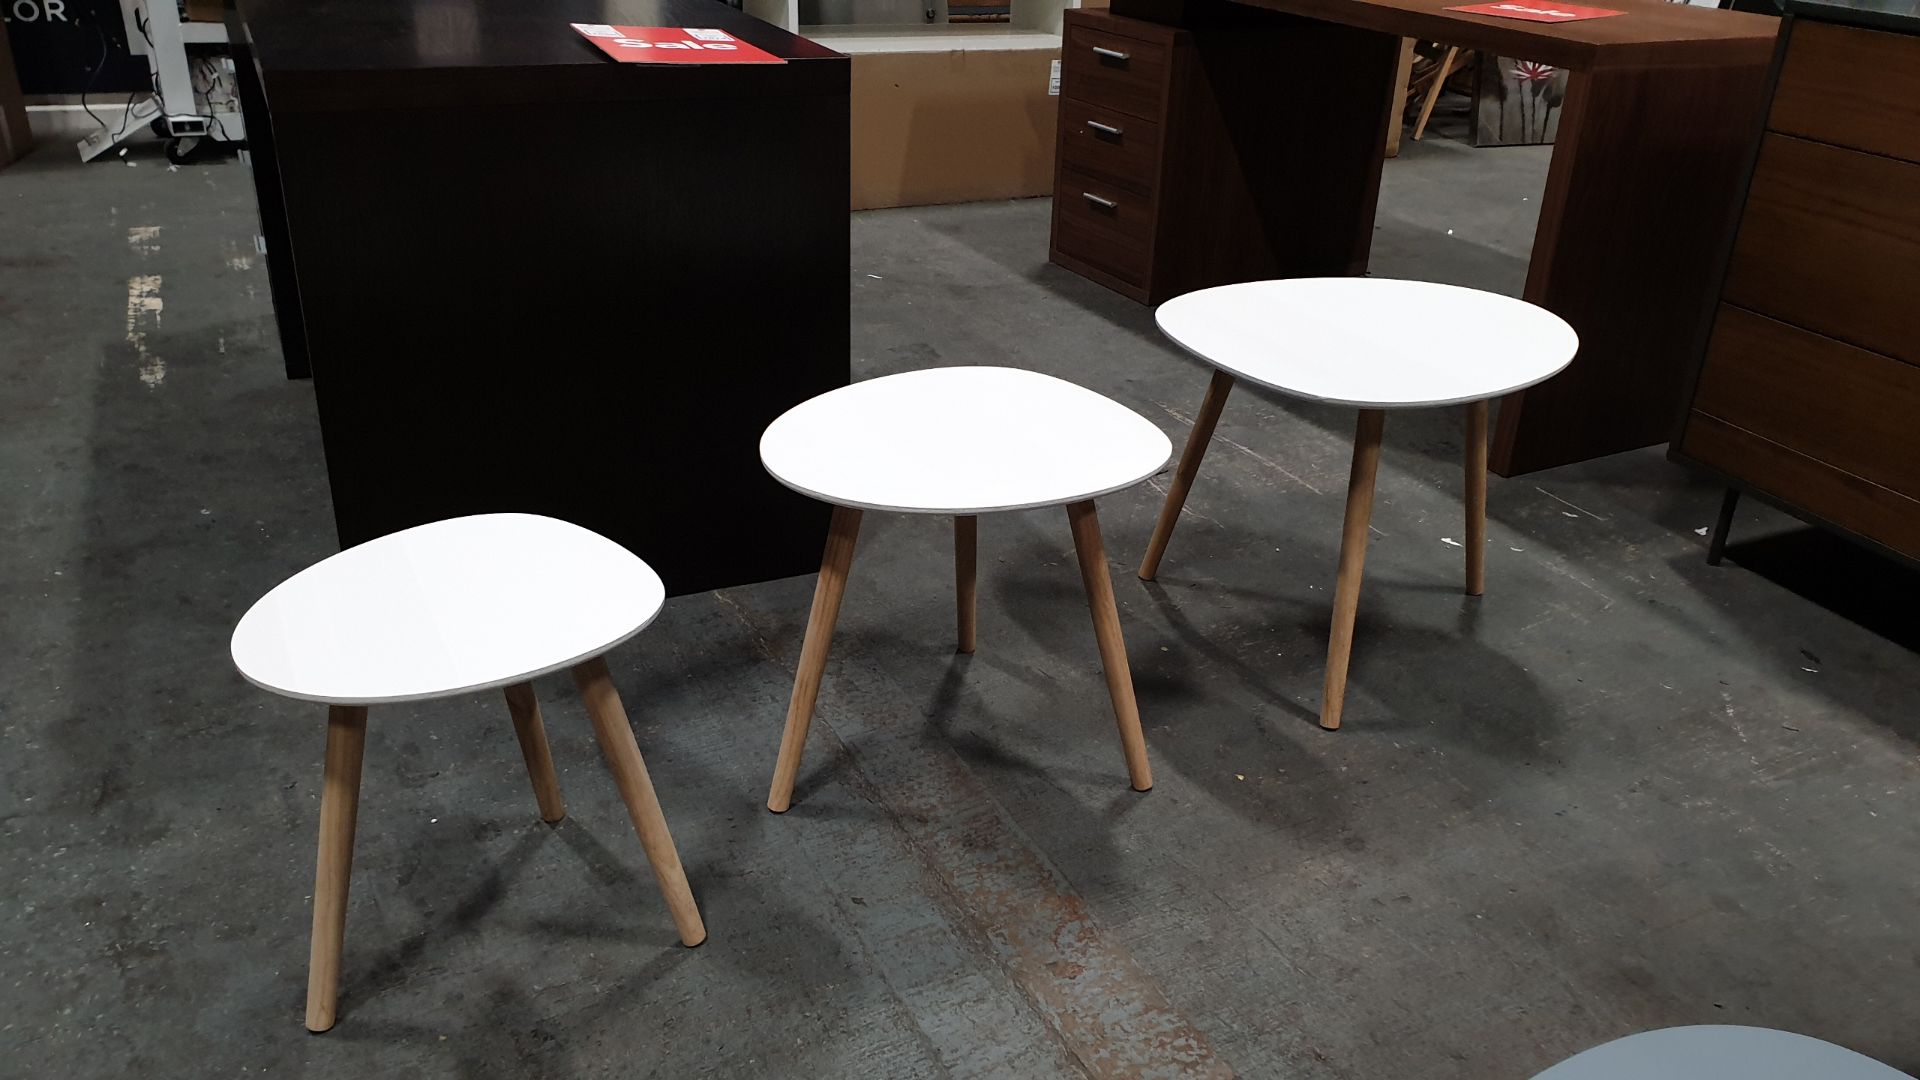 6 X BRAND NEW (CHARLES JACOBS) SET'S OF 3 NESTING TABLE'S IN WHITE (PRODUCT CODE - (CJ-NST-001-WHI)